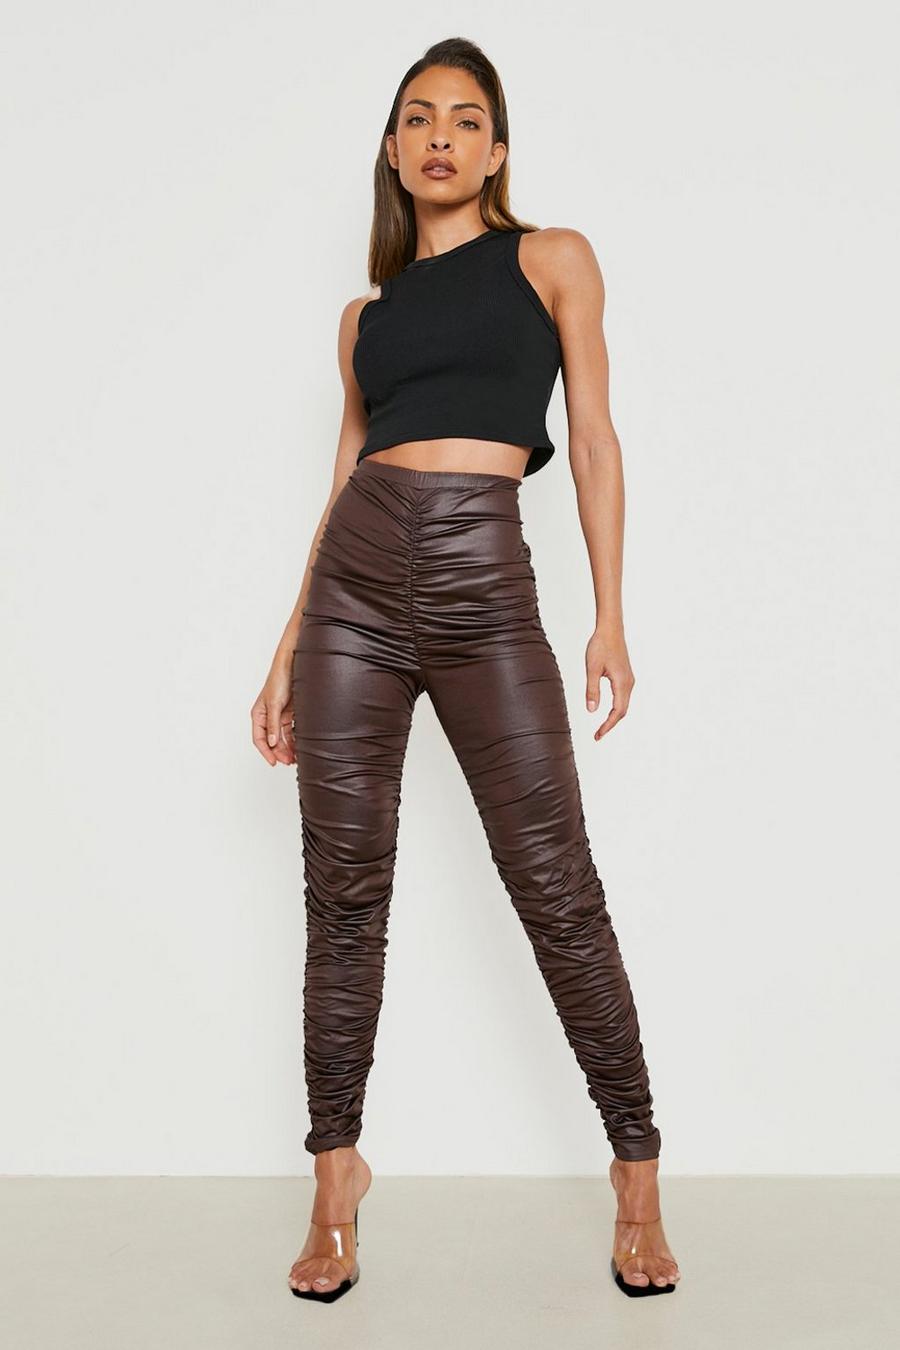 Chocolate brown Leather Look Ruched Leggings